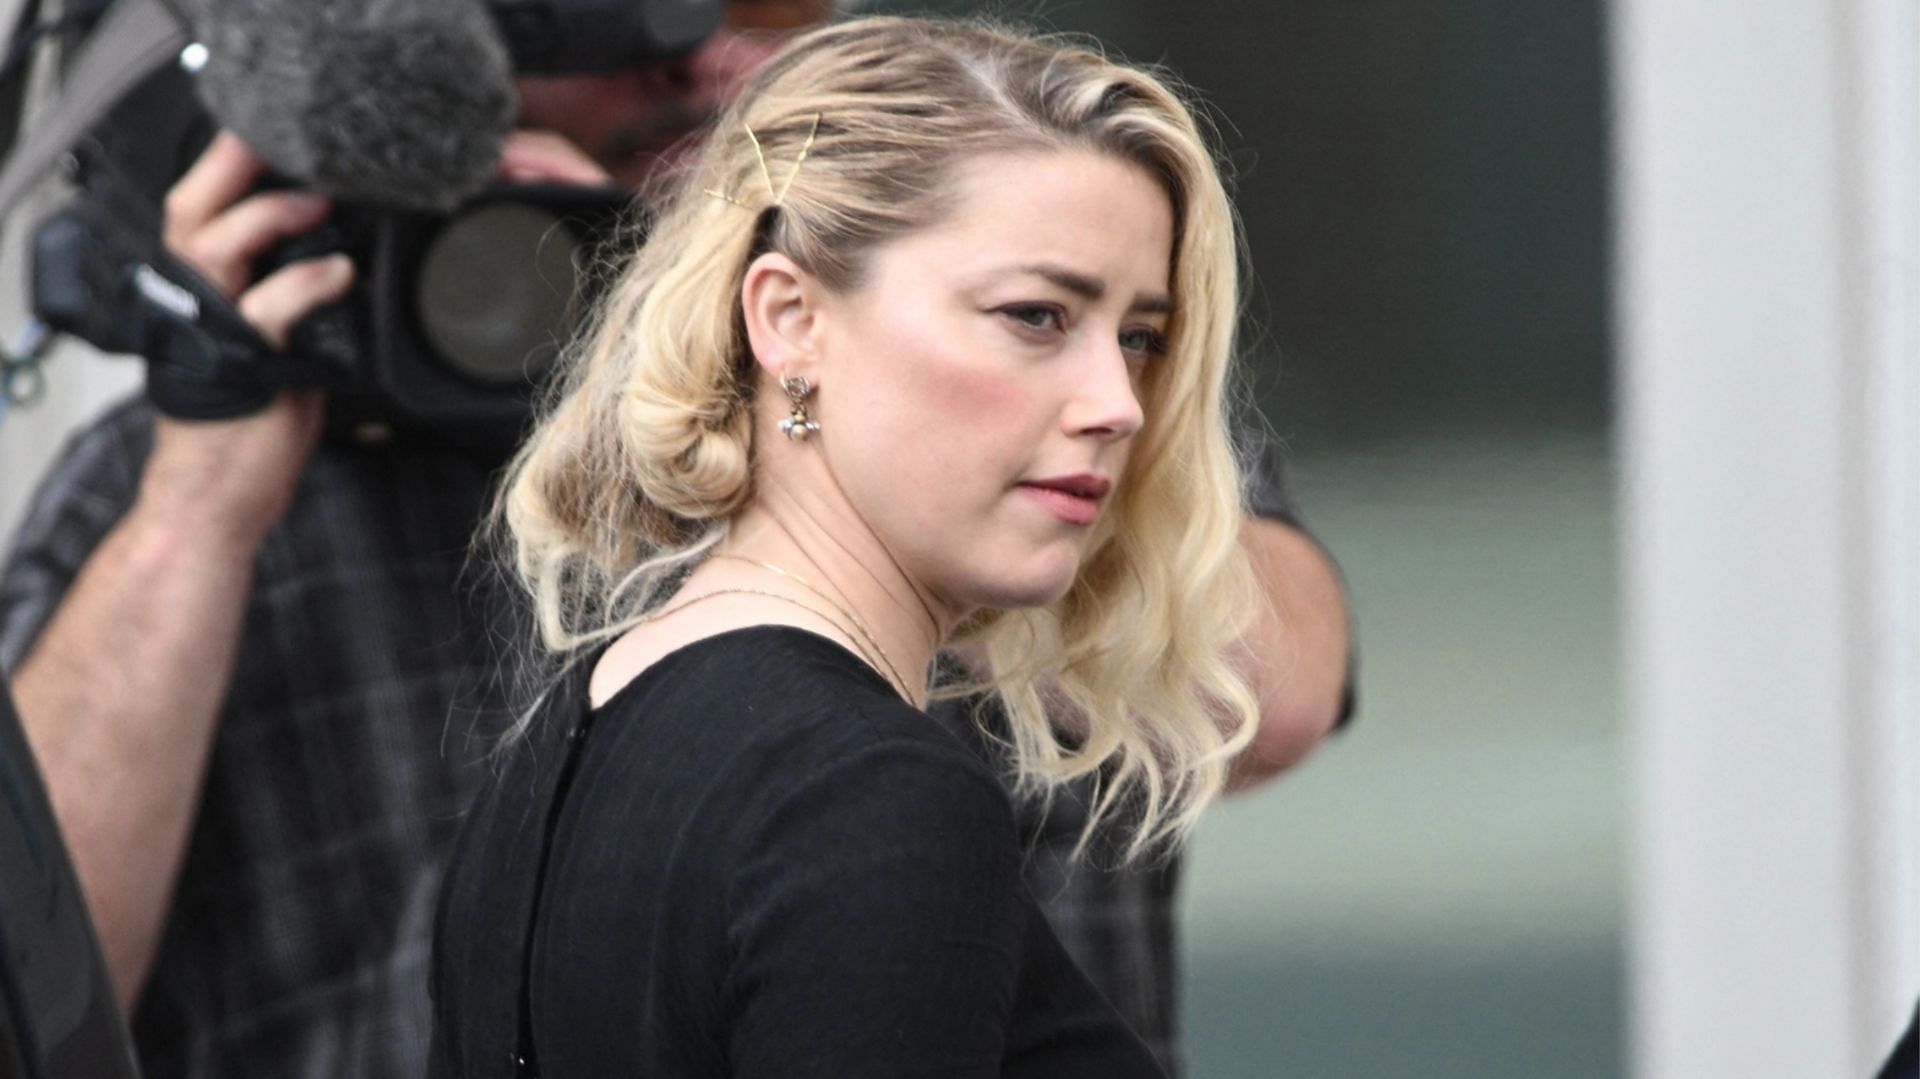 Amber Heard was ordered to pay $10.35 million to Johnny Depp after he won the high-profile defamation case against her (Image via Getty Images/Brendan Smialowski)